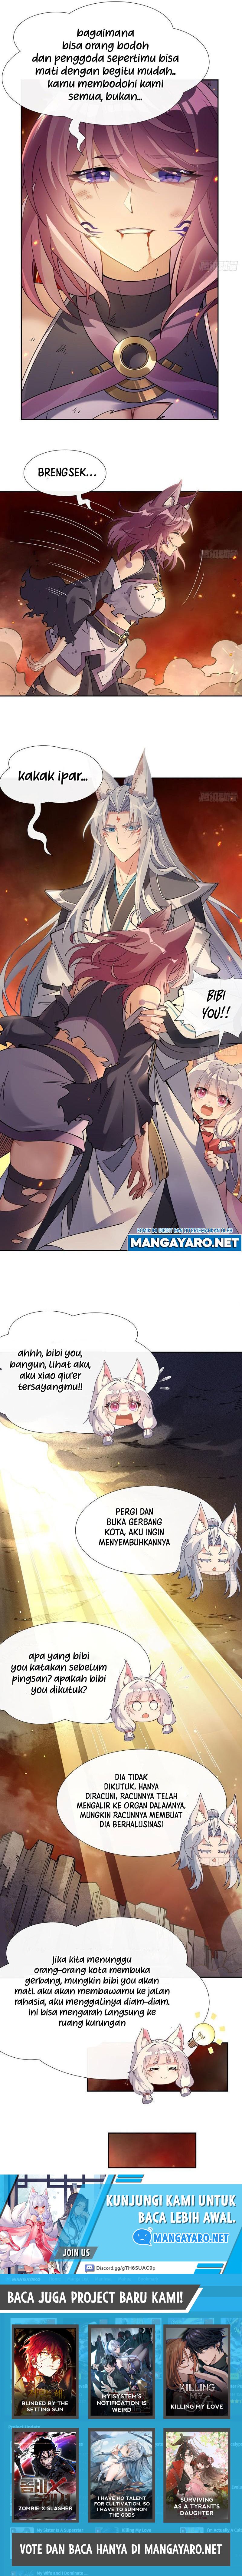 Dilarang COPAS - situs resmi www.mangacanblog.com - Komik my female apprentices are all big shots from the future 175 - chapter 175 176 Indonesia my female apprentices are all big shots from the future 175 - chapter 175 Terbaru 9|Baca Manga Komik Indonesia|Mangacan